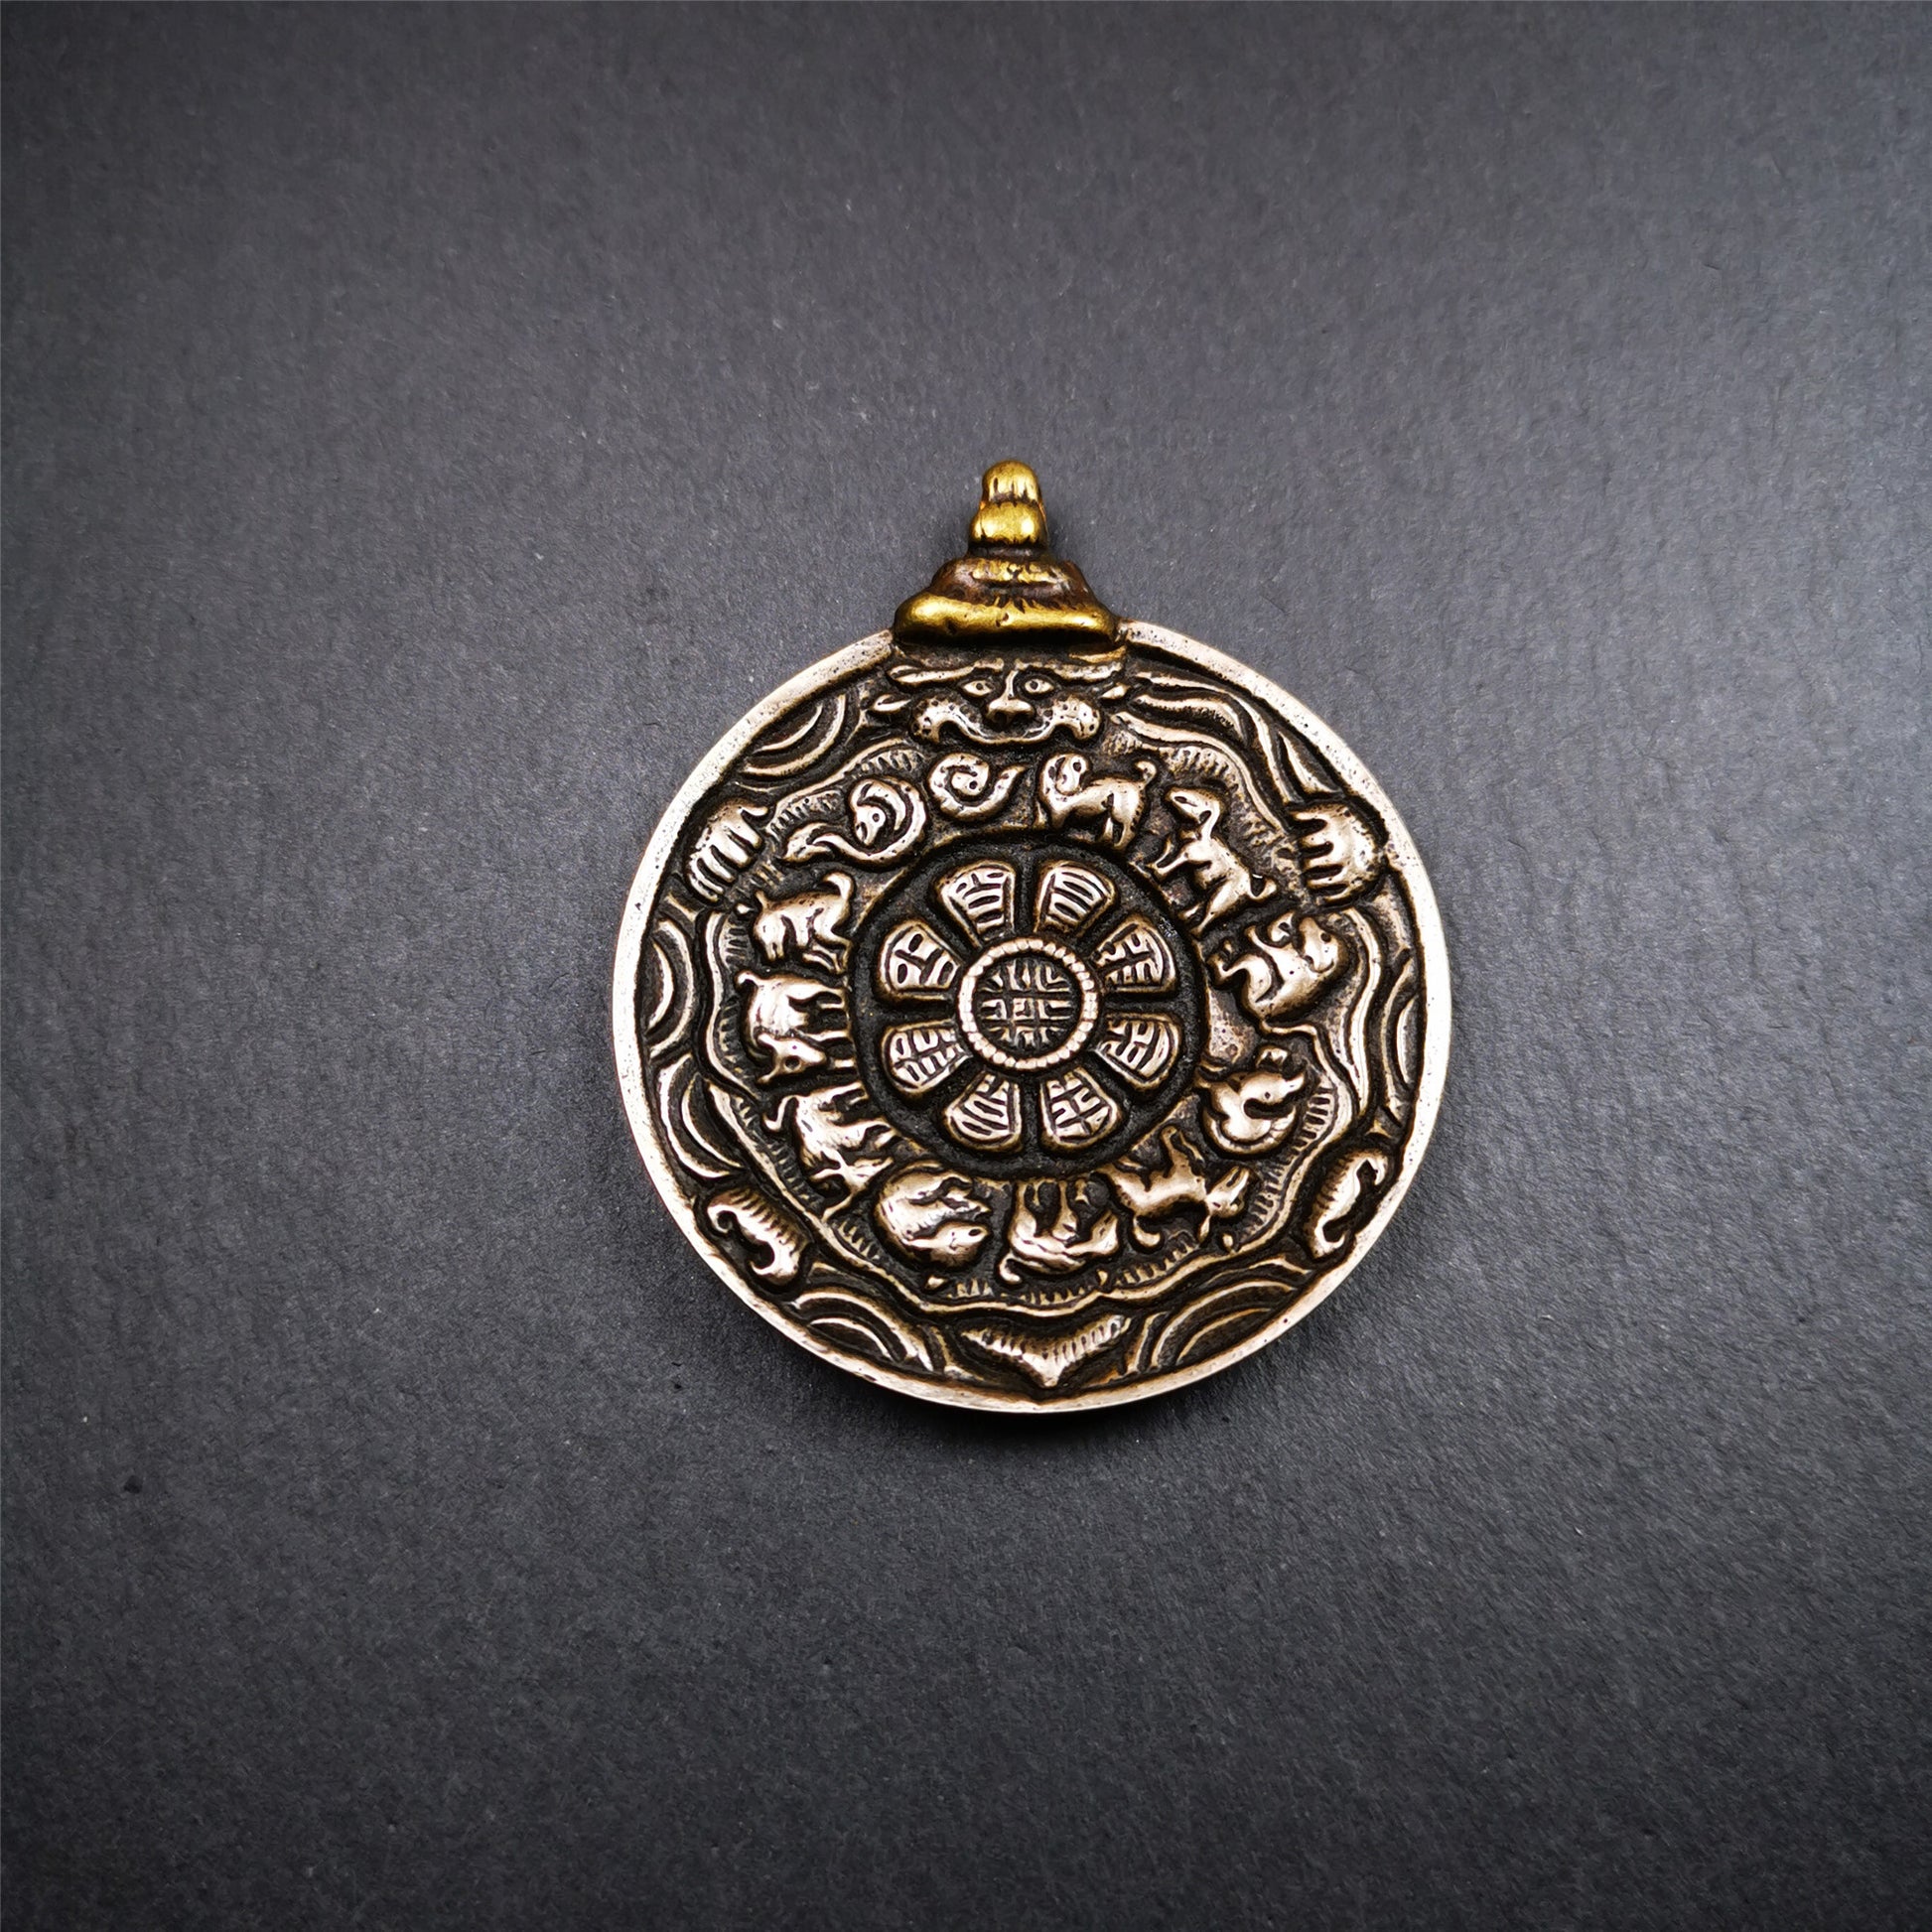 This melong calendar badge was collect from Kathok Monastery Tibet about 50+ years. This batch of melong are sacred  amulets used by Kathok Monastery to present to believers,consecrated and blessed by lama. It adopts a split casting method,1.89 inch.